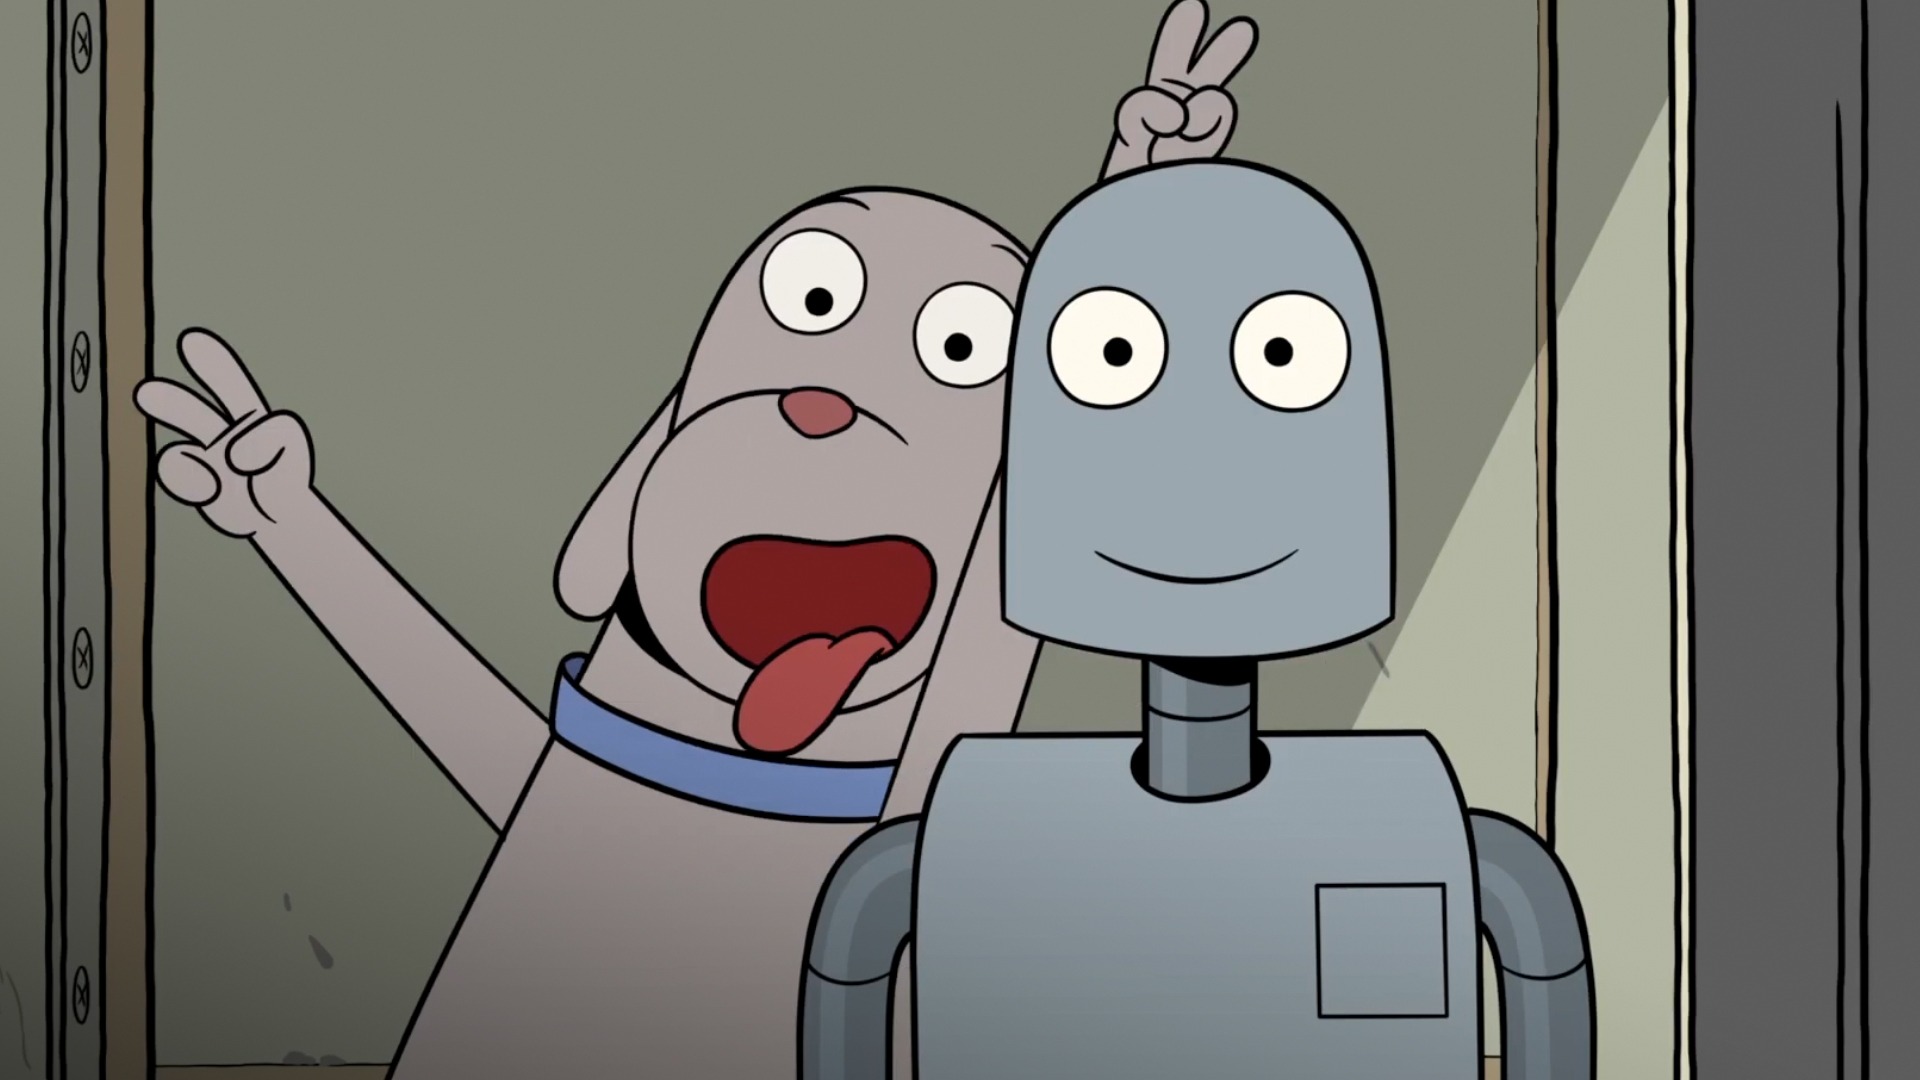 ROBOT DREAMS Trailer: Pablo Berger’s Oscar-Nominated Ode To Friendship Arrives in May